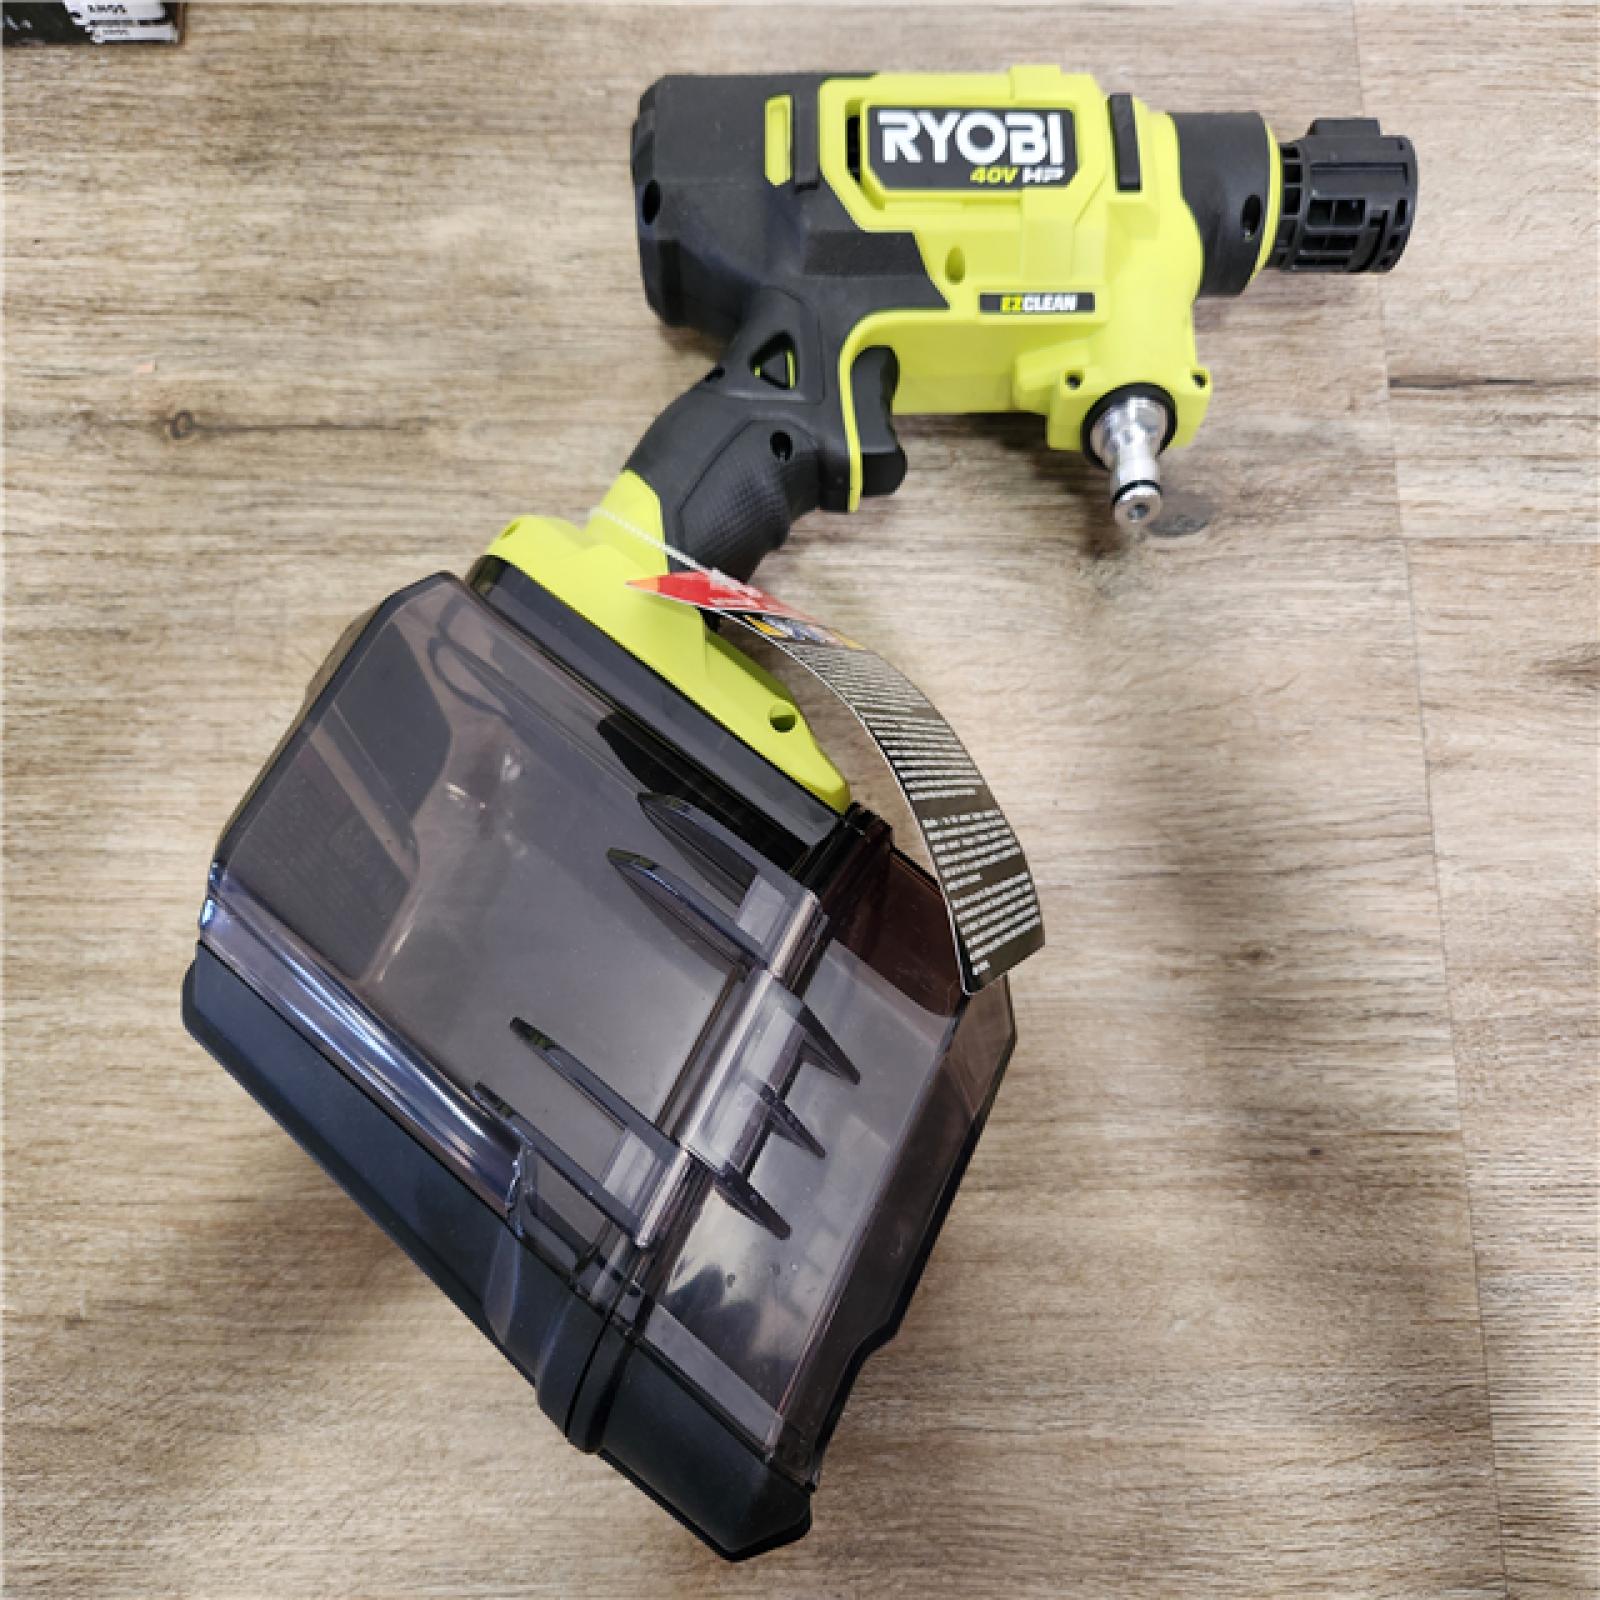 Phoenix Location NEW RYOBI 40V HP Brushless EZClean 600 PSI 0.7 GPM Cordless Battery Cold Water Power Cleaner with 2.0 Ah Battery and Charger